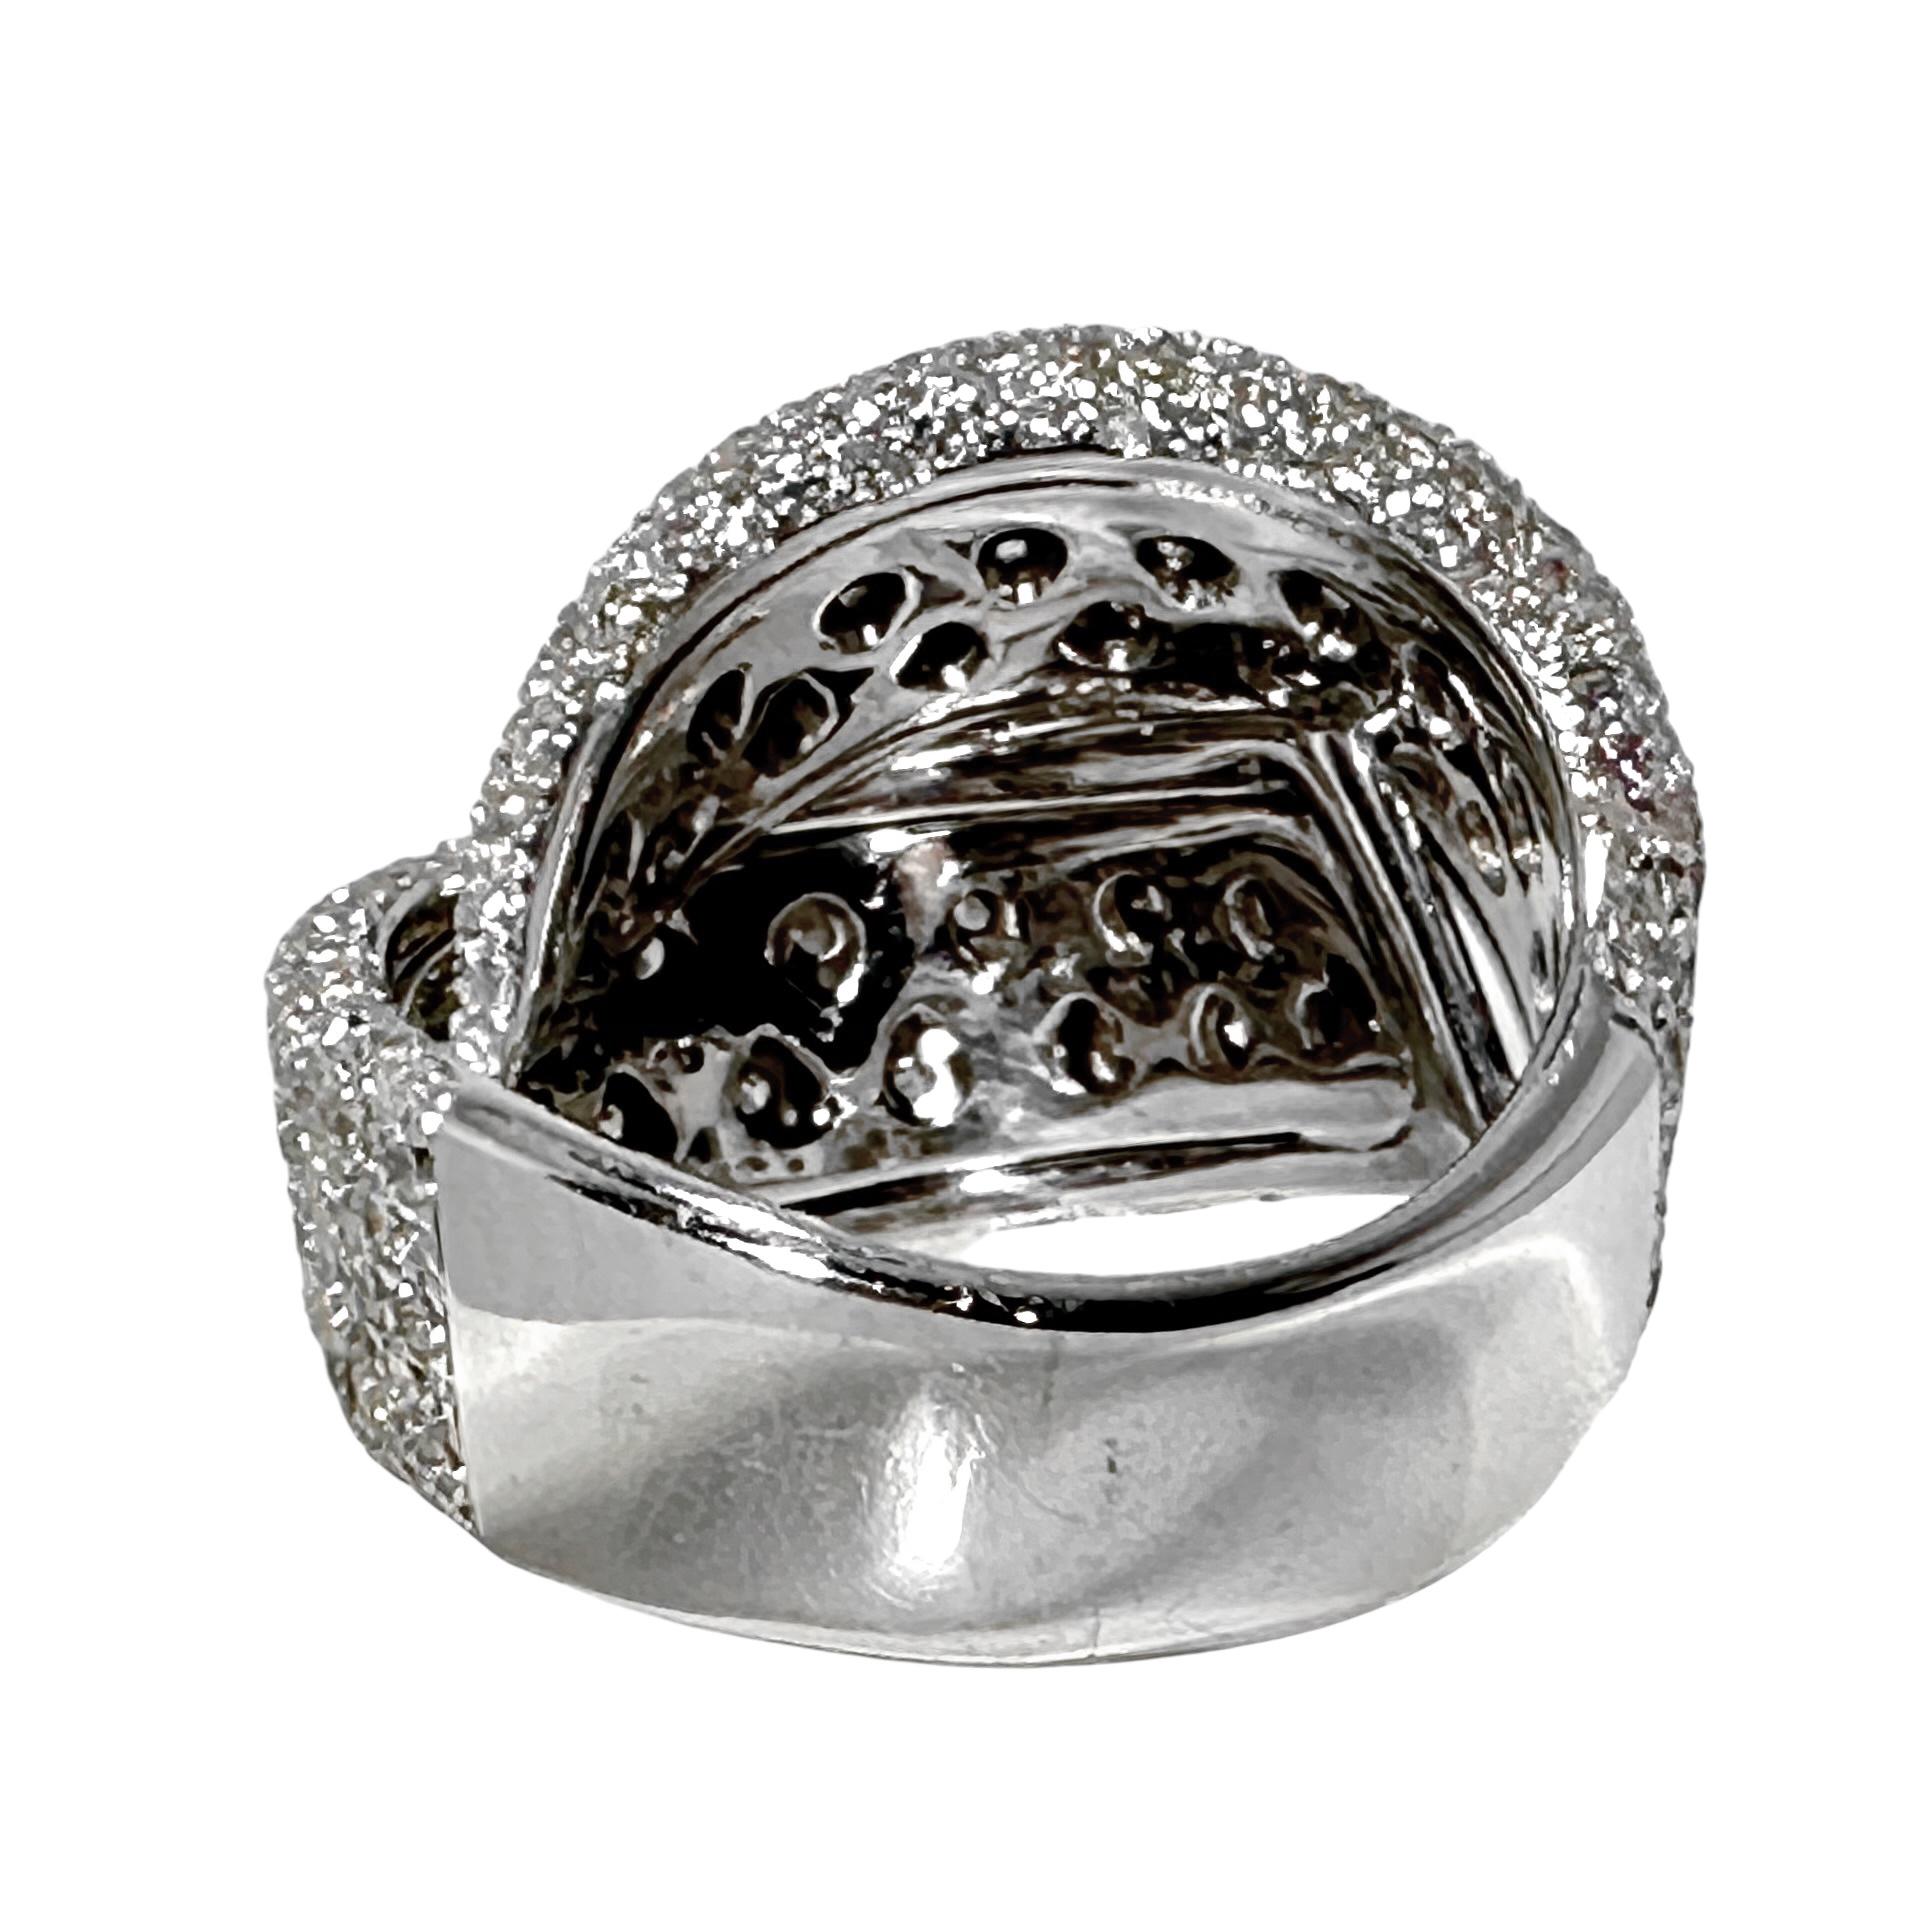 Women's Luxurious 18K White Gold & Diamond Encrusted Bypass Dome Ring with Italian Flair For Sale